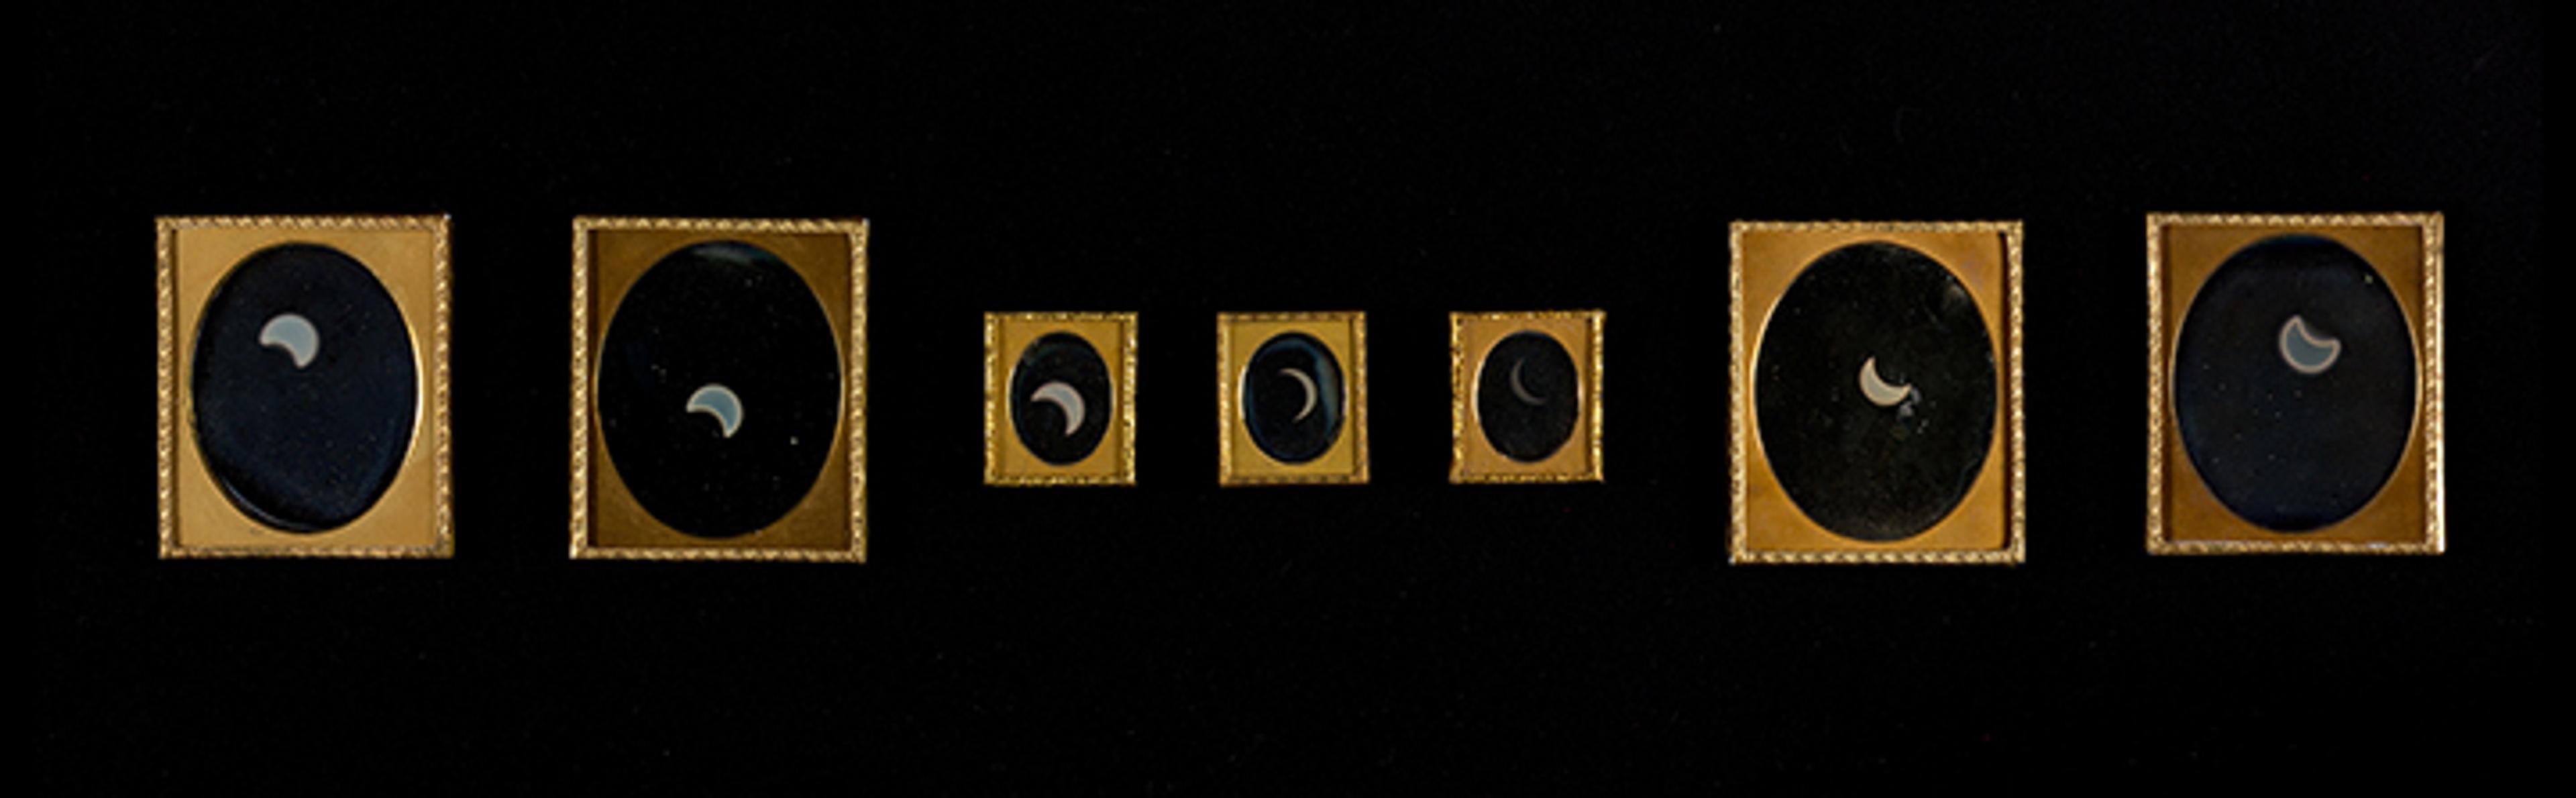 A series of 7 daguerreotype photographs of a total solar eclipse by William and Frederick Langenheim